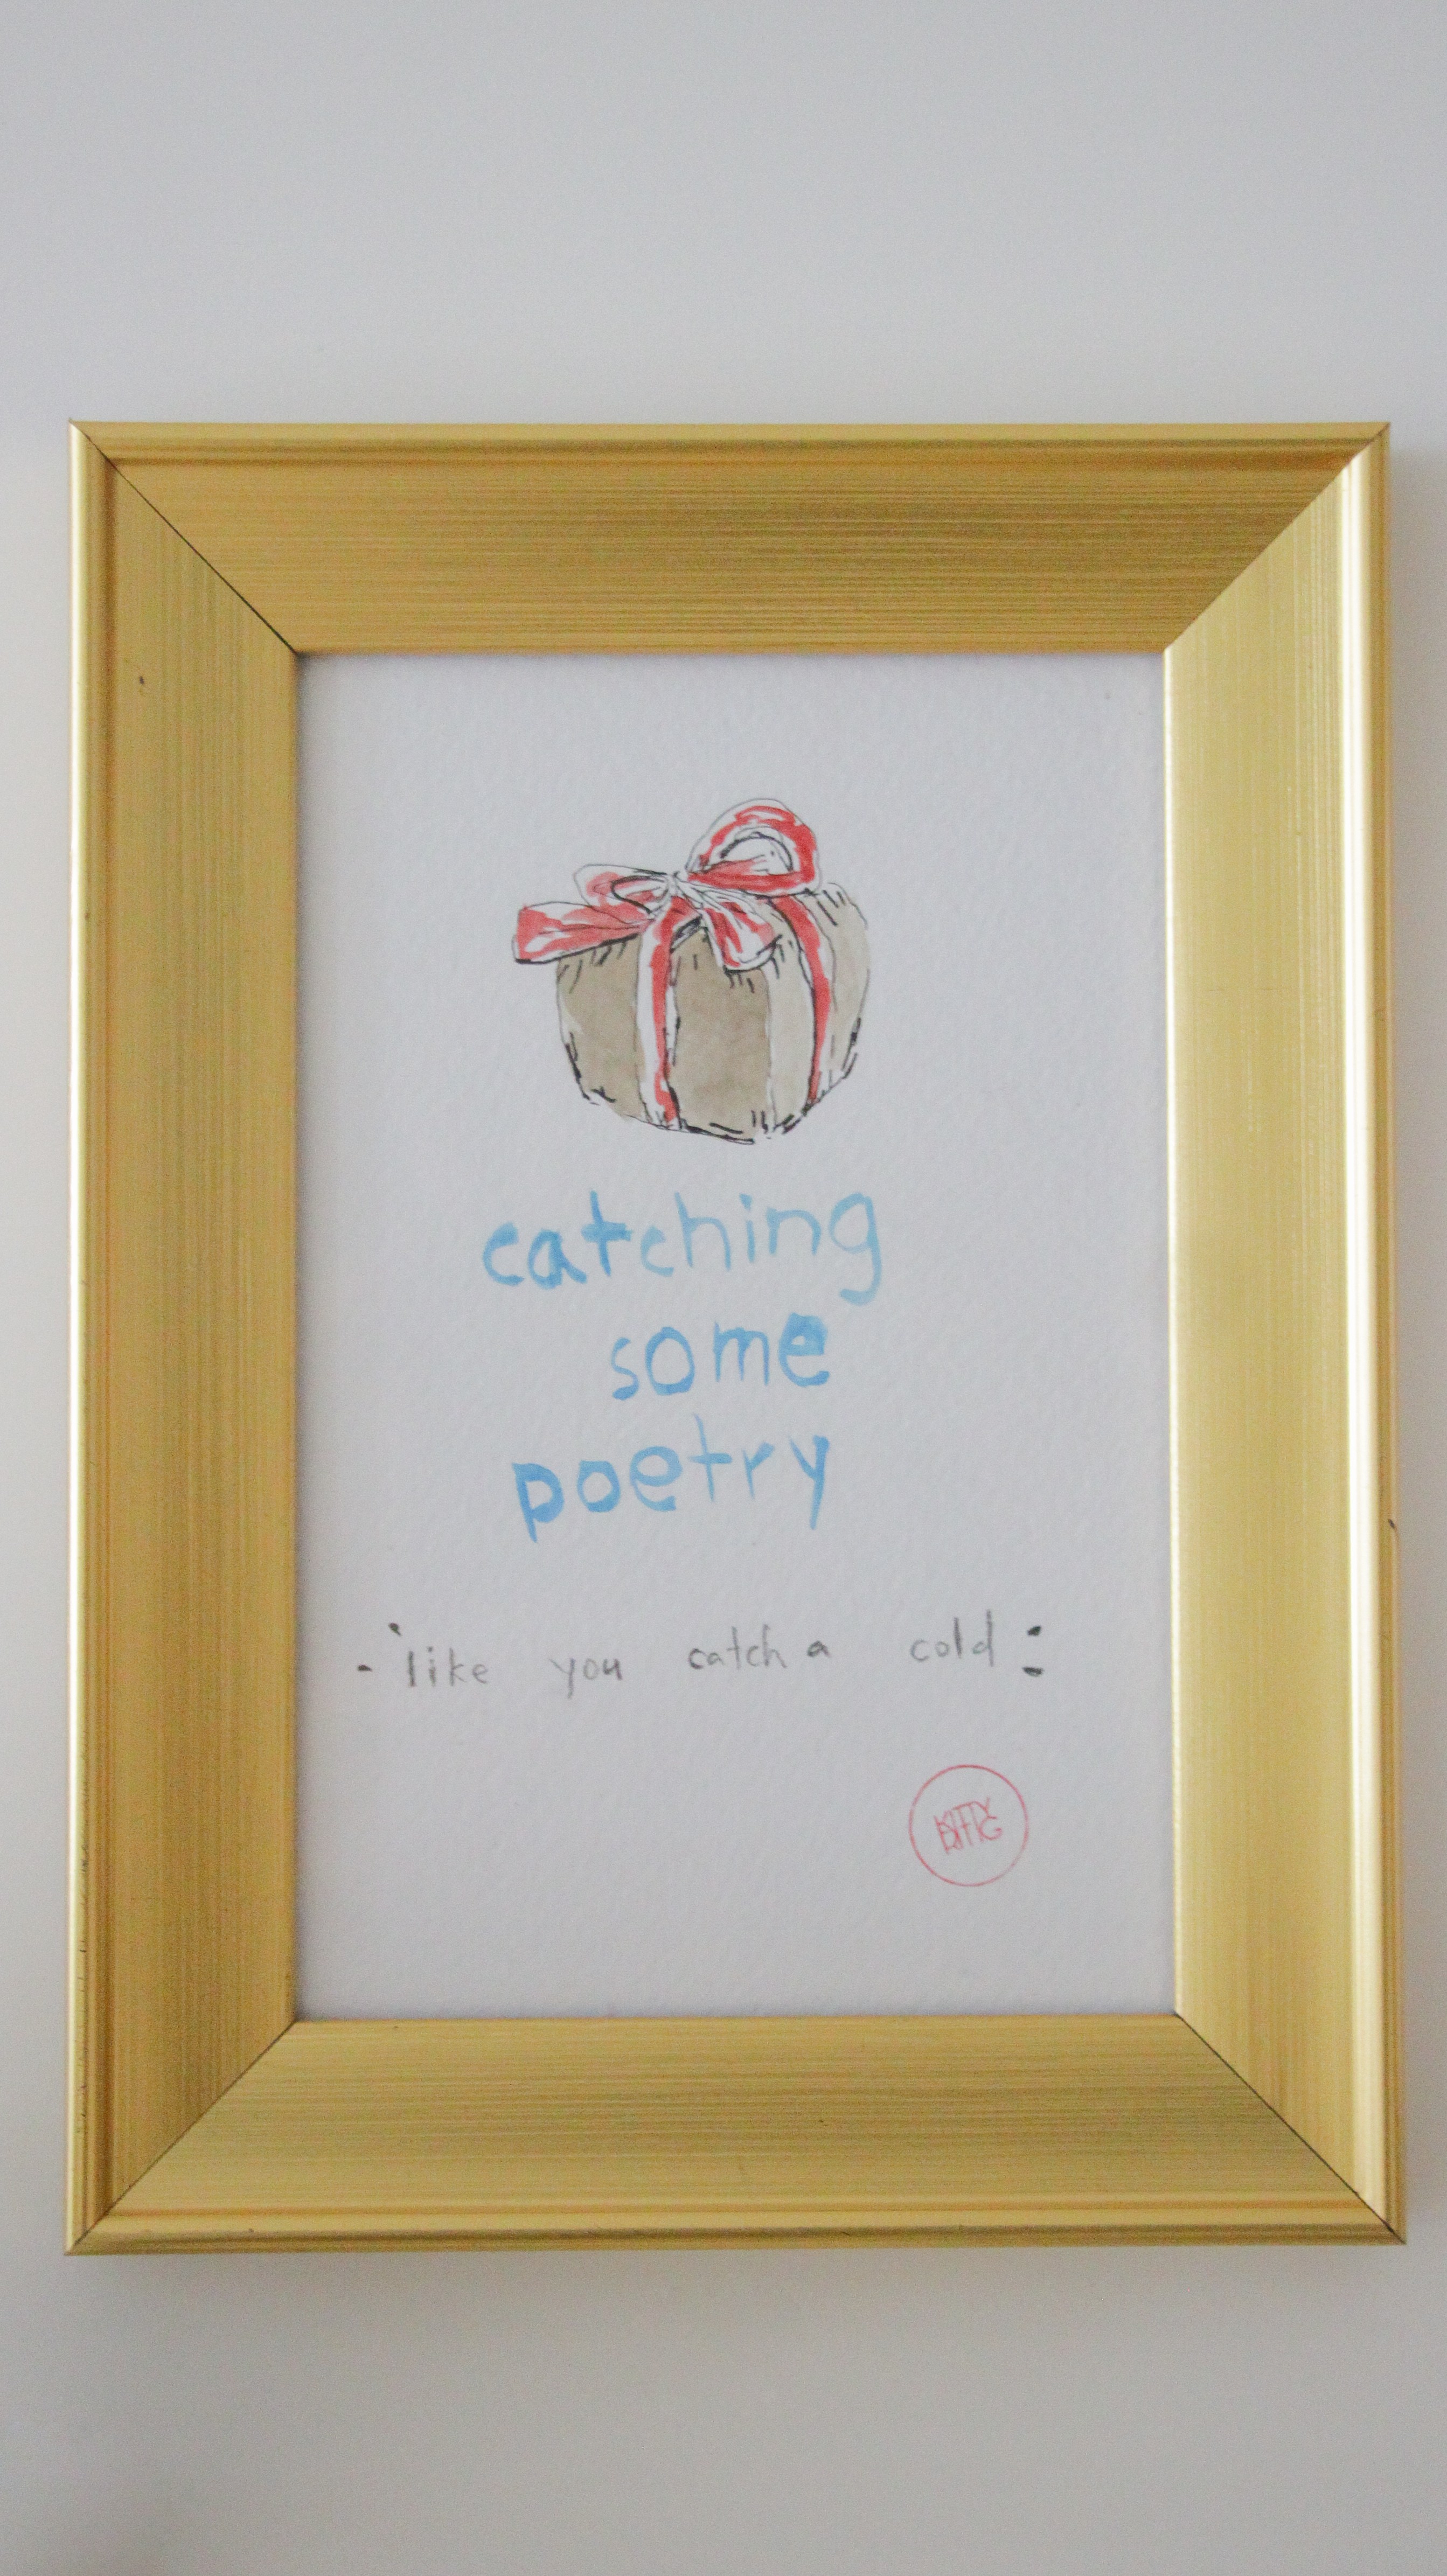 Poetry catcher by Kitty Ritig